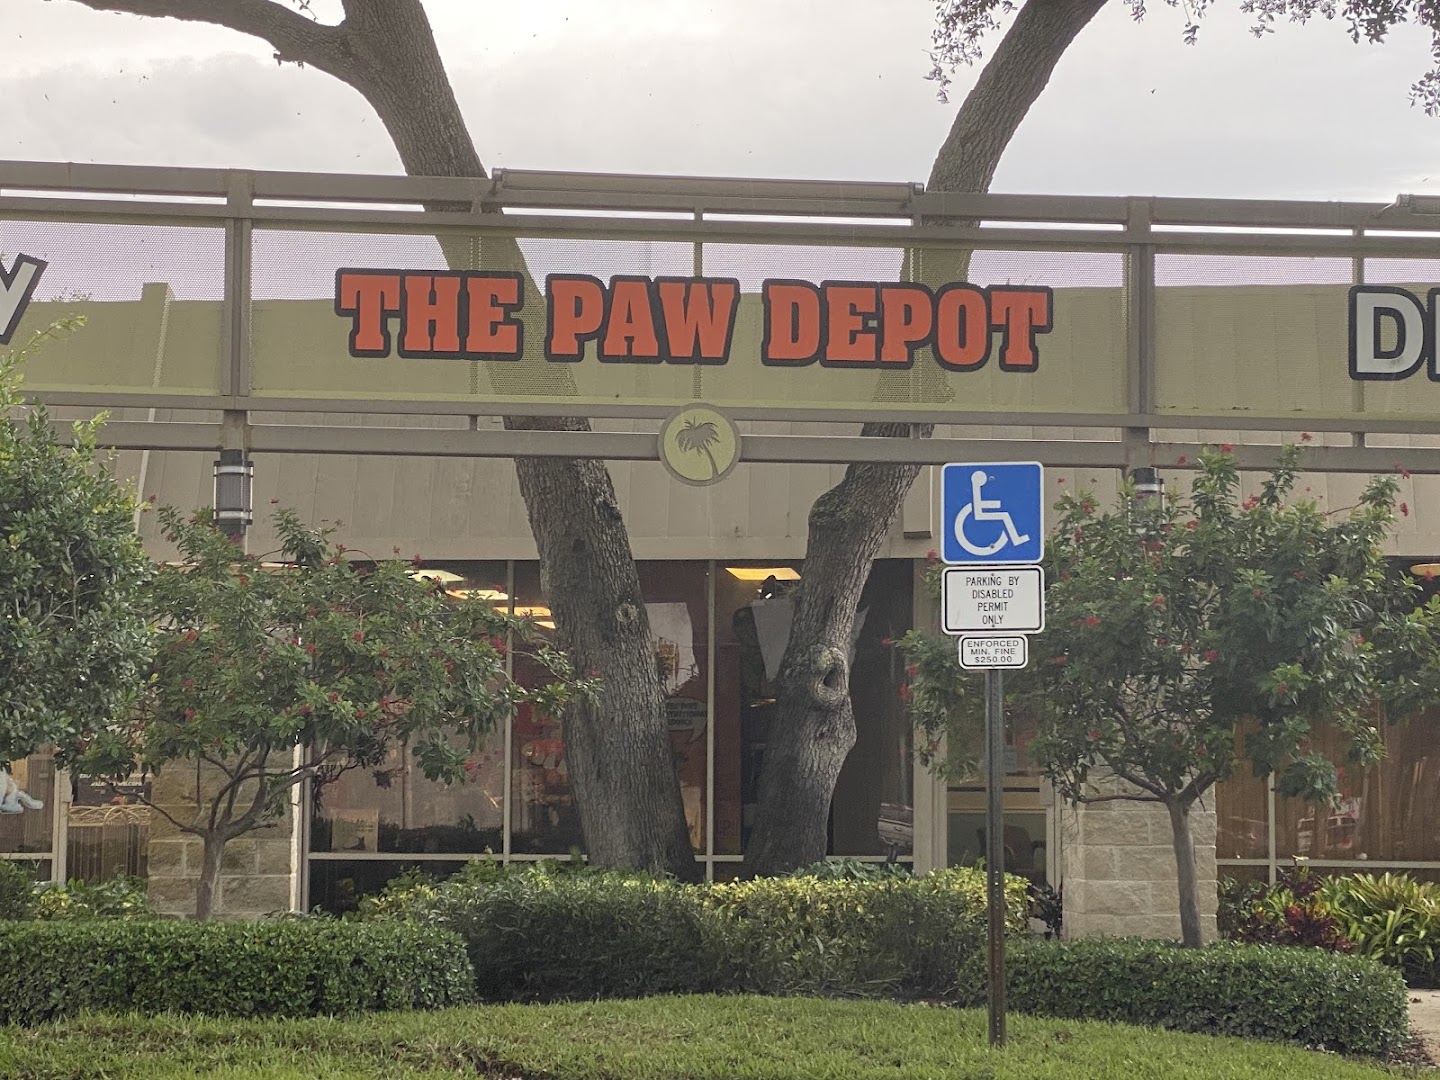 The Paw Depot